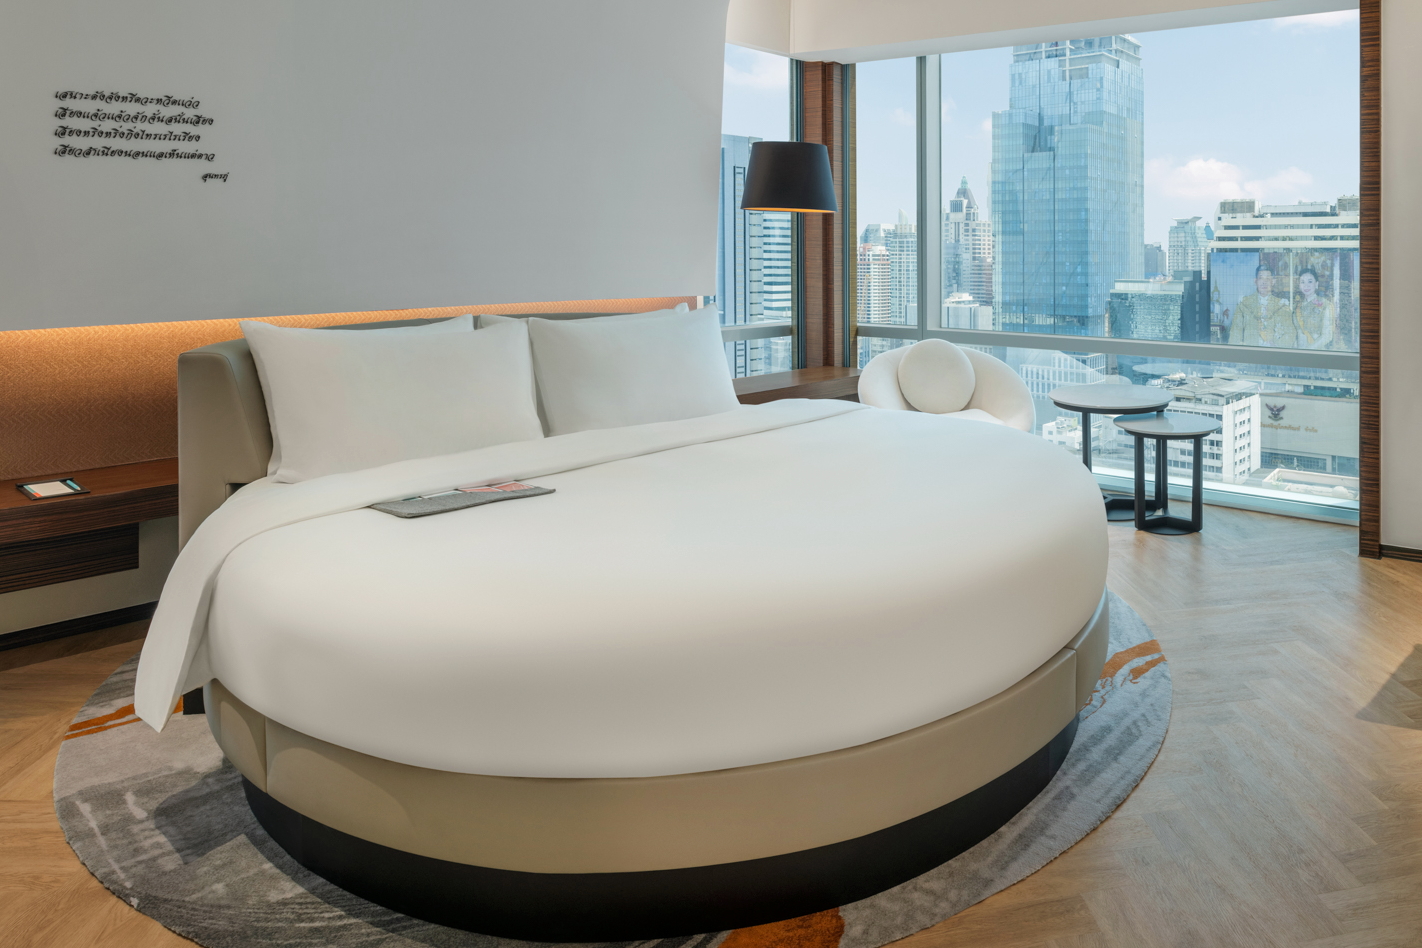 Some rooms at Le Meridien Bangkok now feature a round bed. Click to enlarge.